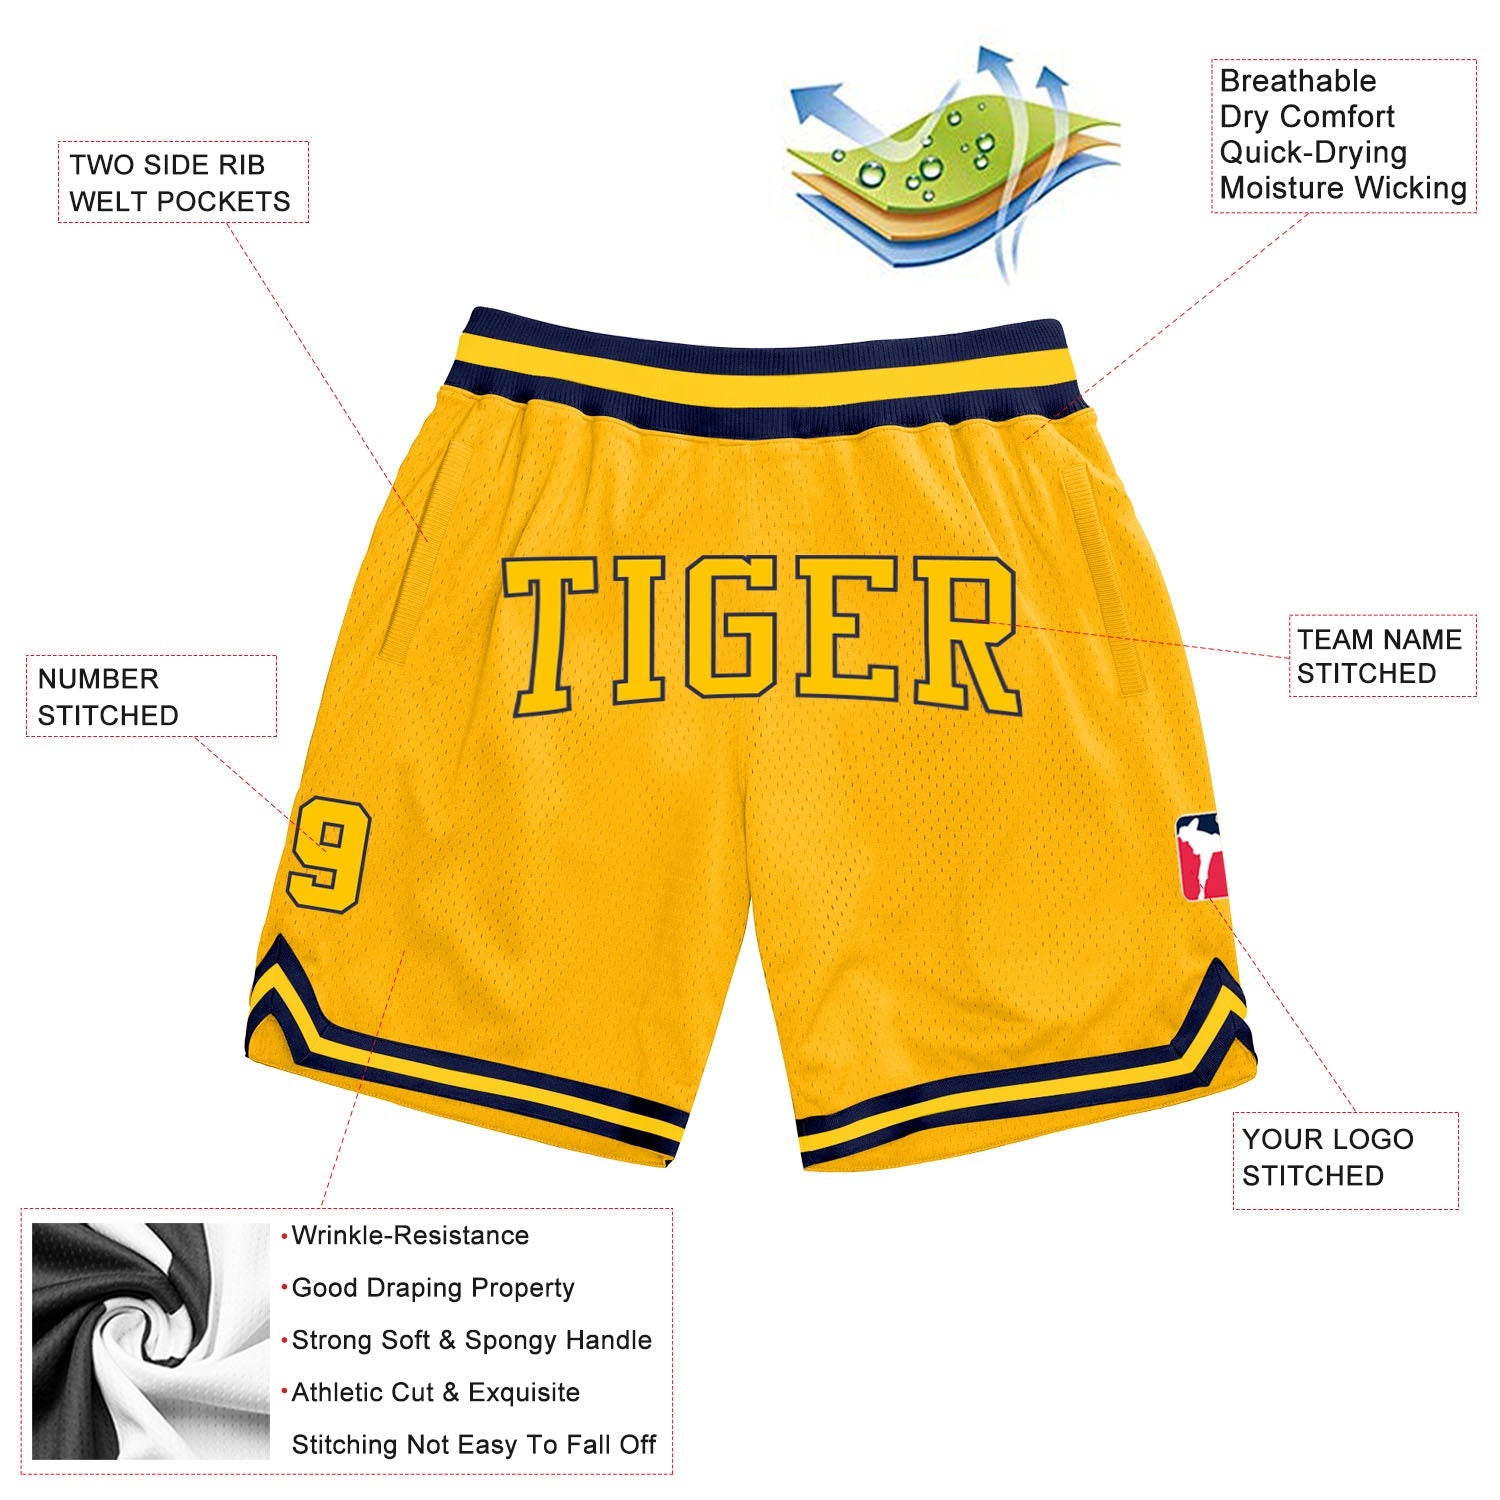 Custom Gold Gold-Navy Authentic Throwback Basketball Shorts